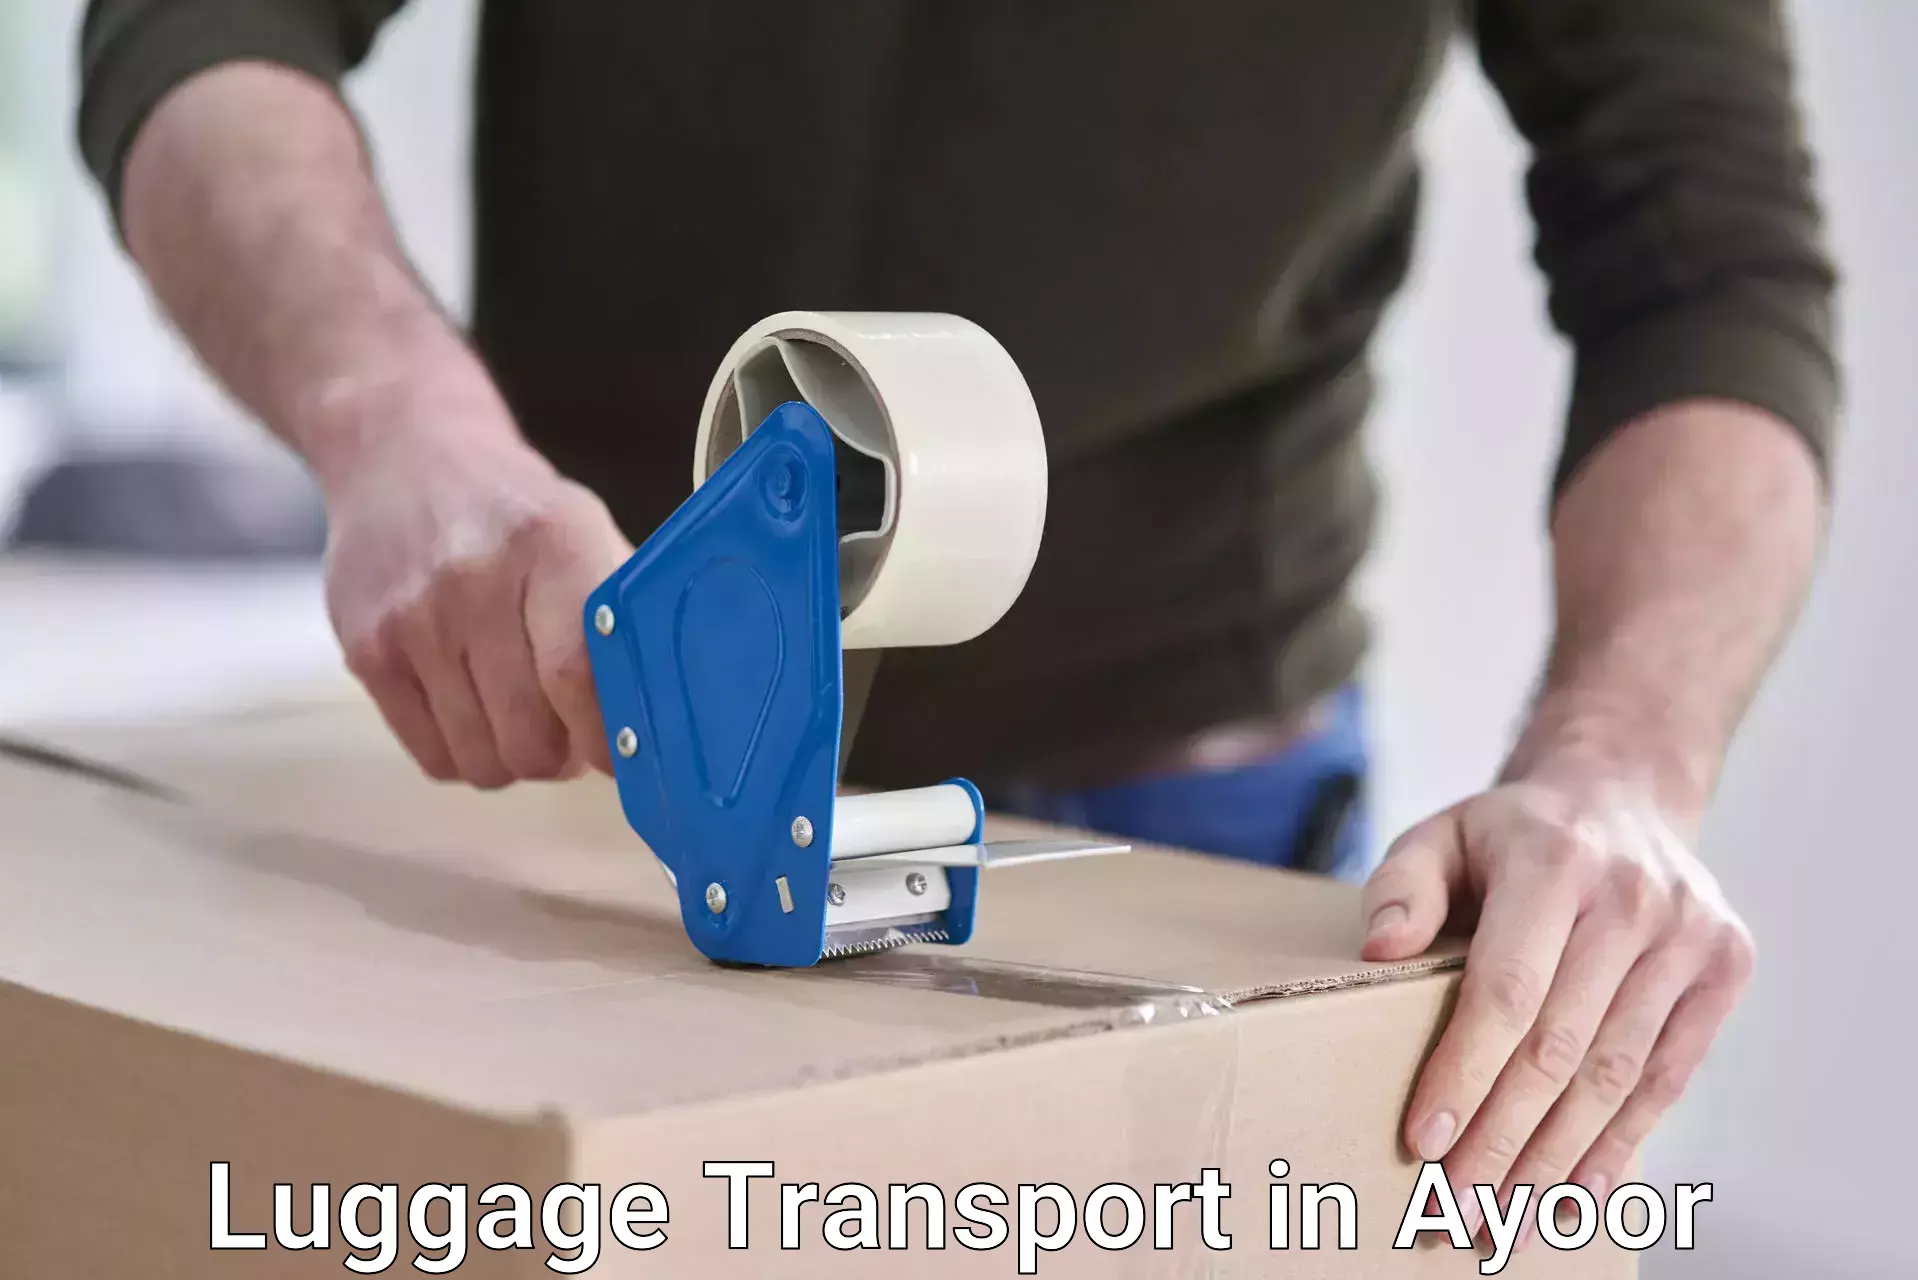 Baggage transport technology in Ayoor